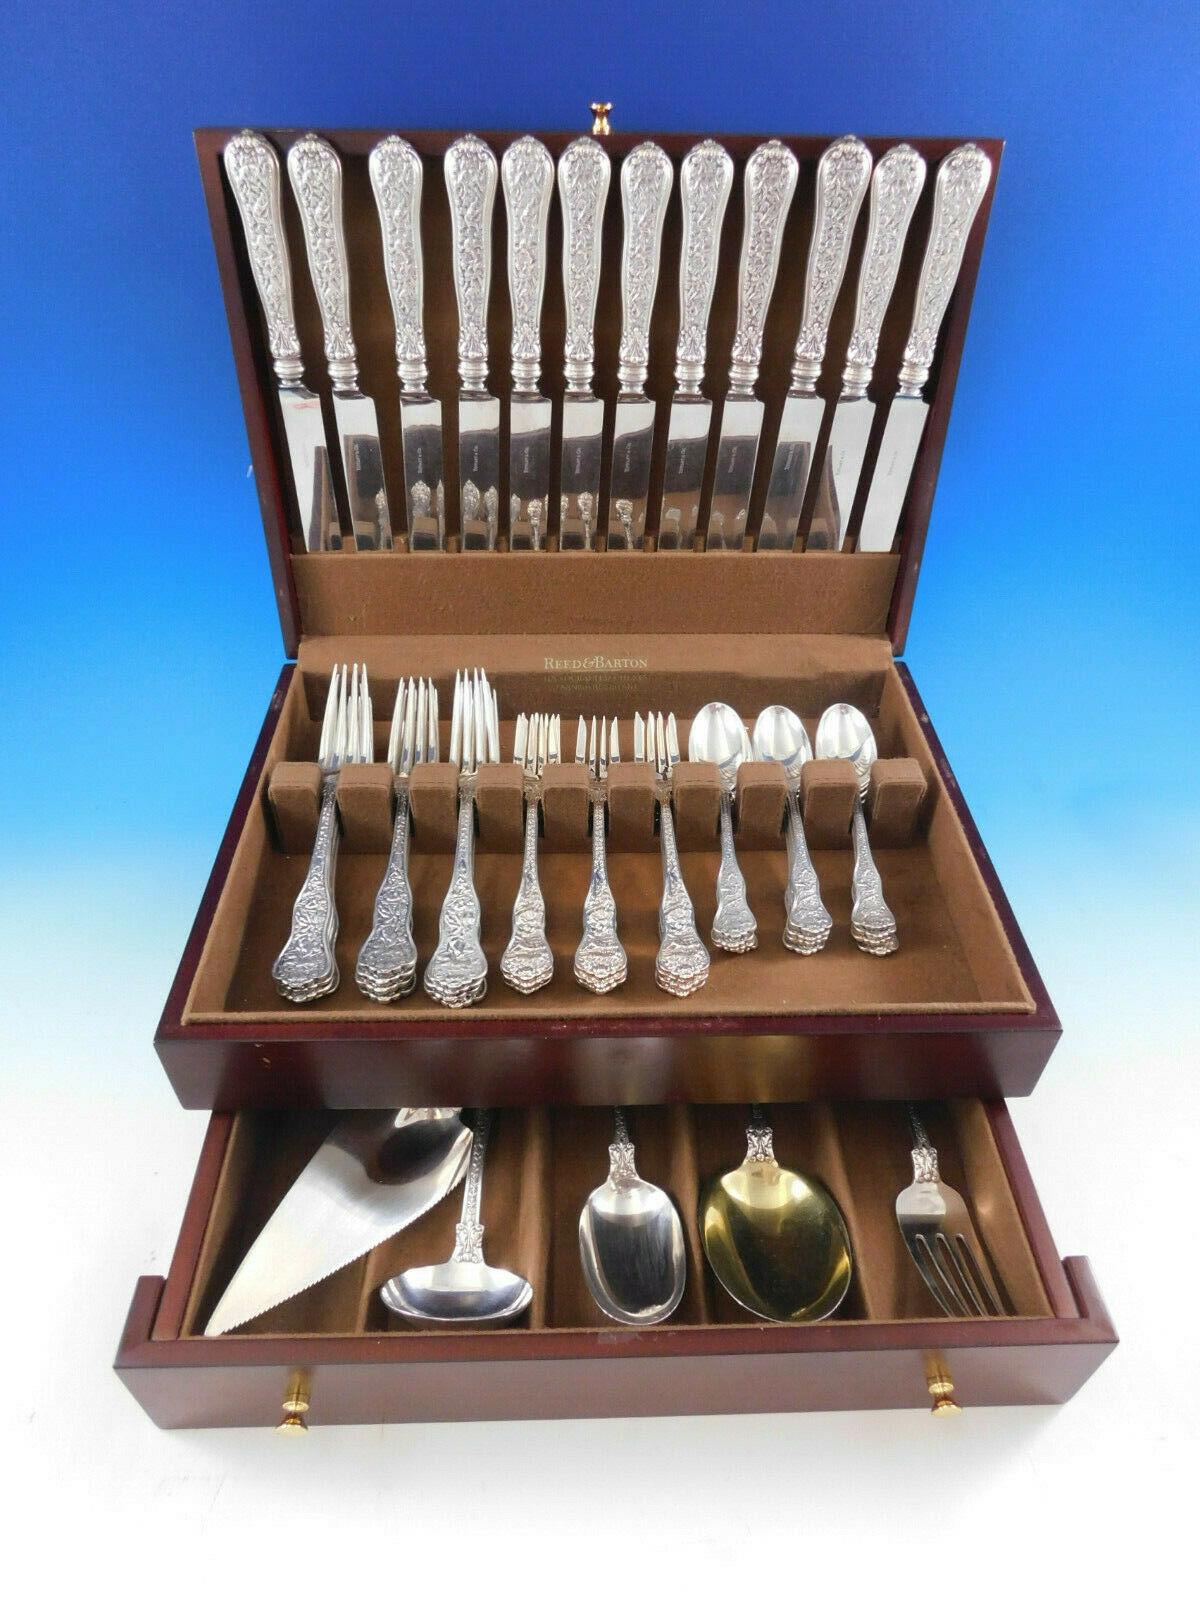 Superb Olympian by Tiffany & Co. sterling silver flatware set, 53 pieces. This set includes:

12 large dinner size knives with stainless blunt blades, 10 1/4